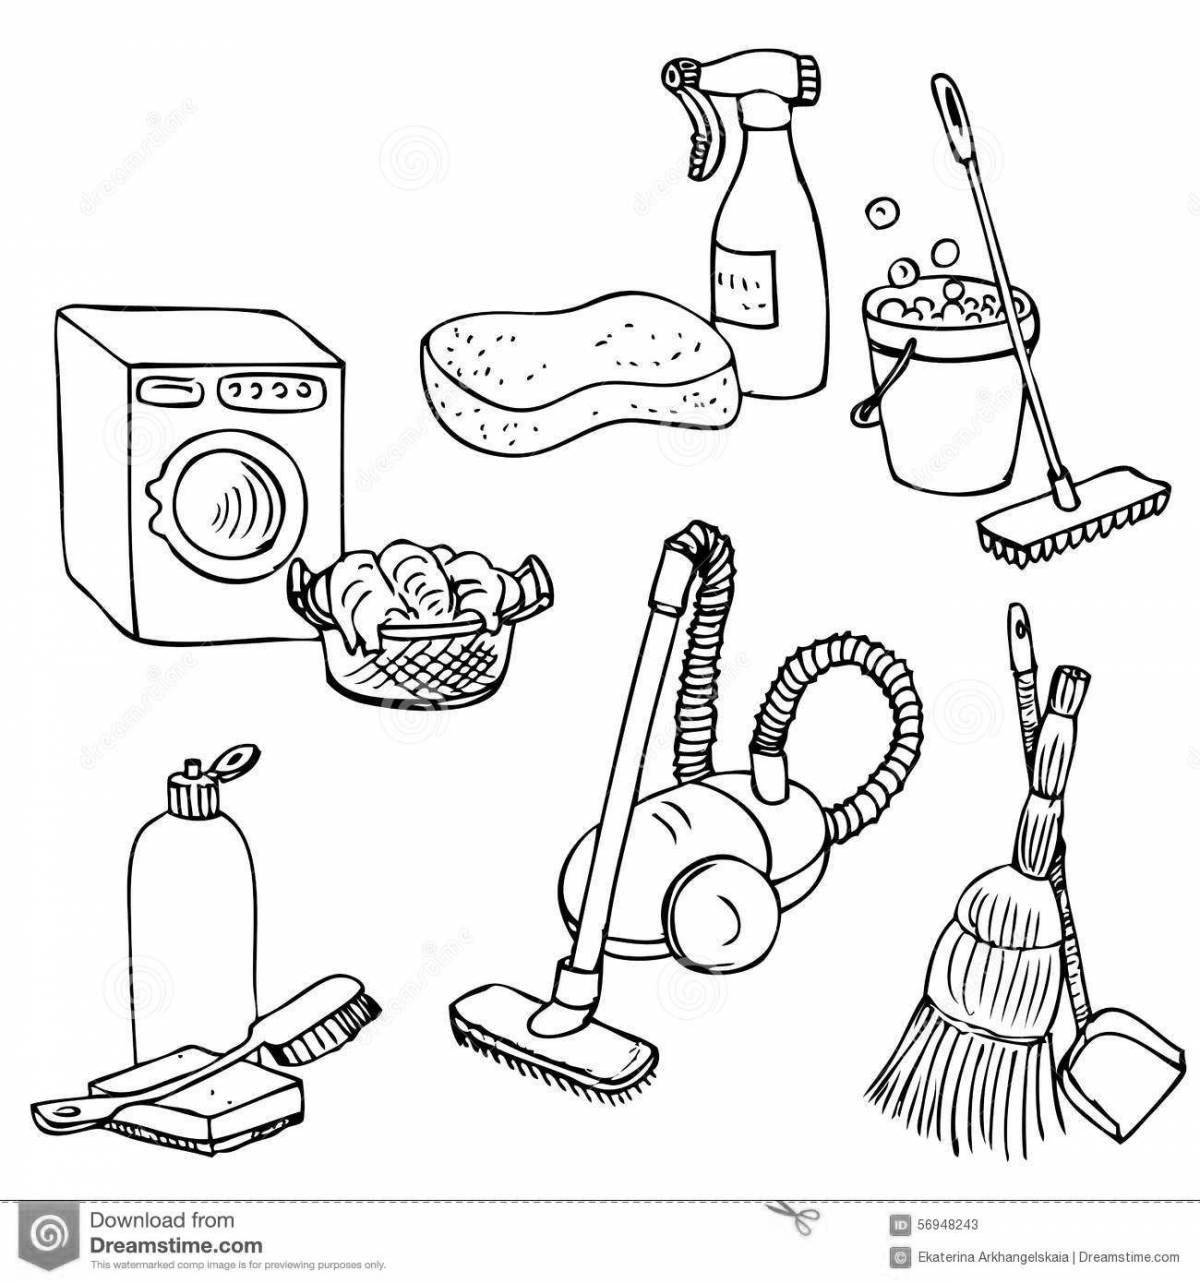 Comic cleaning coloring page